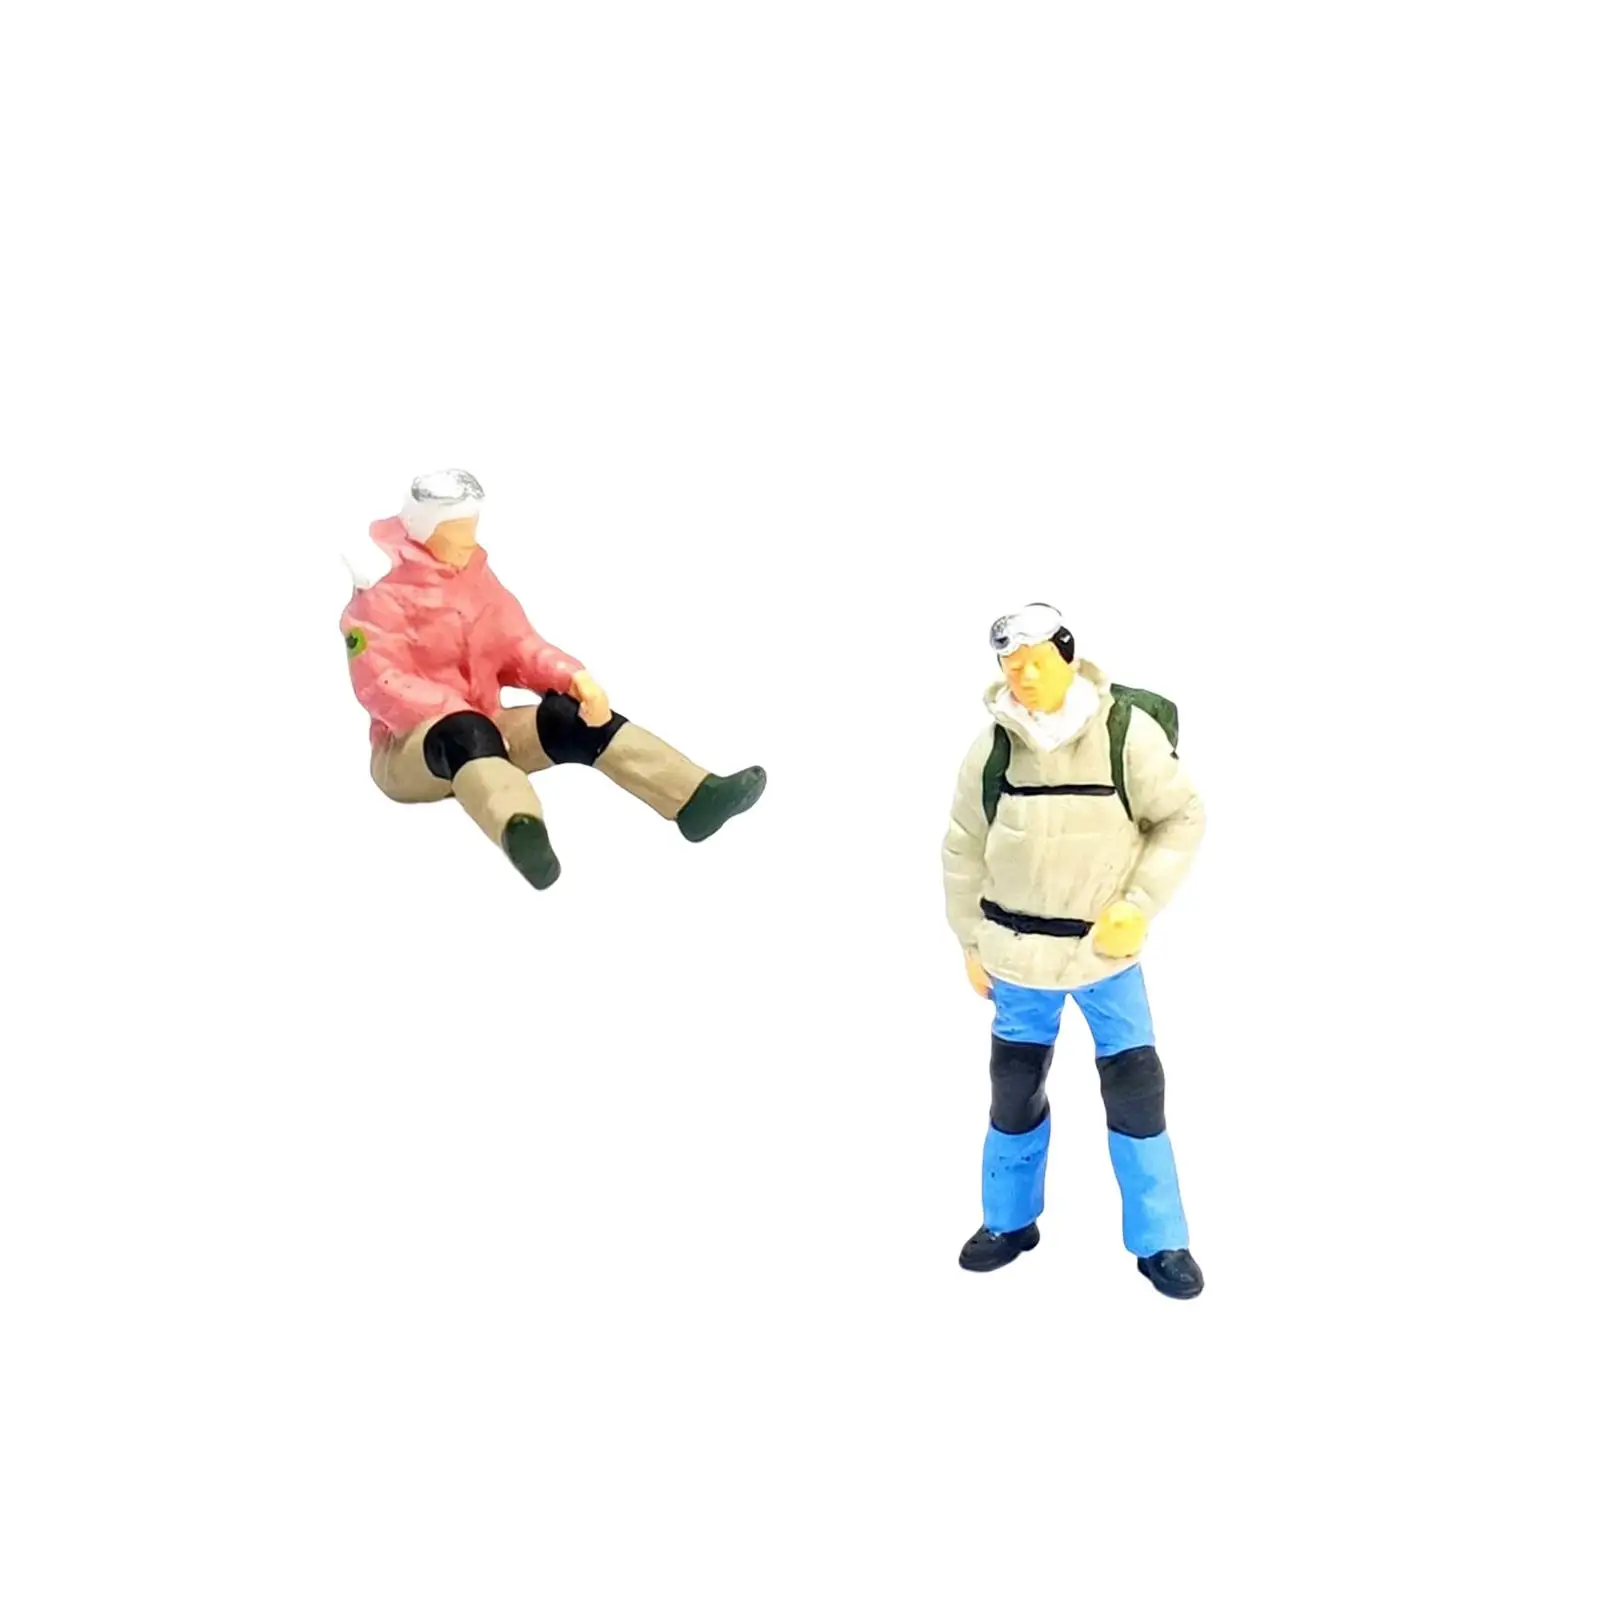 2 Pieces Climbing People Figurines Sitting Standing Model Simulation Miniature Toy Sporting Painted Figures for Miniature Scene